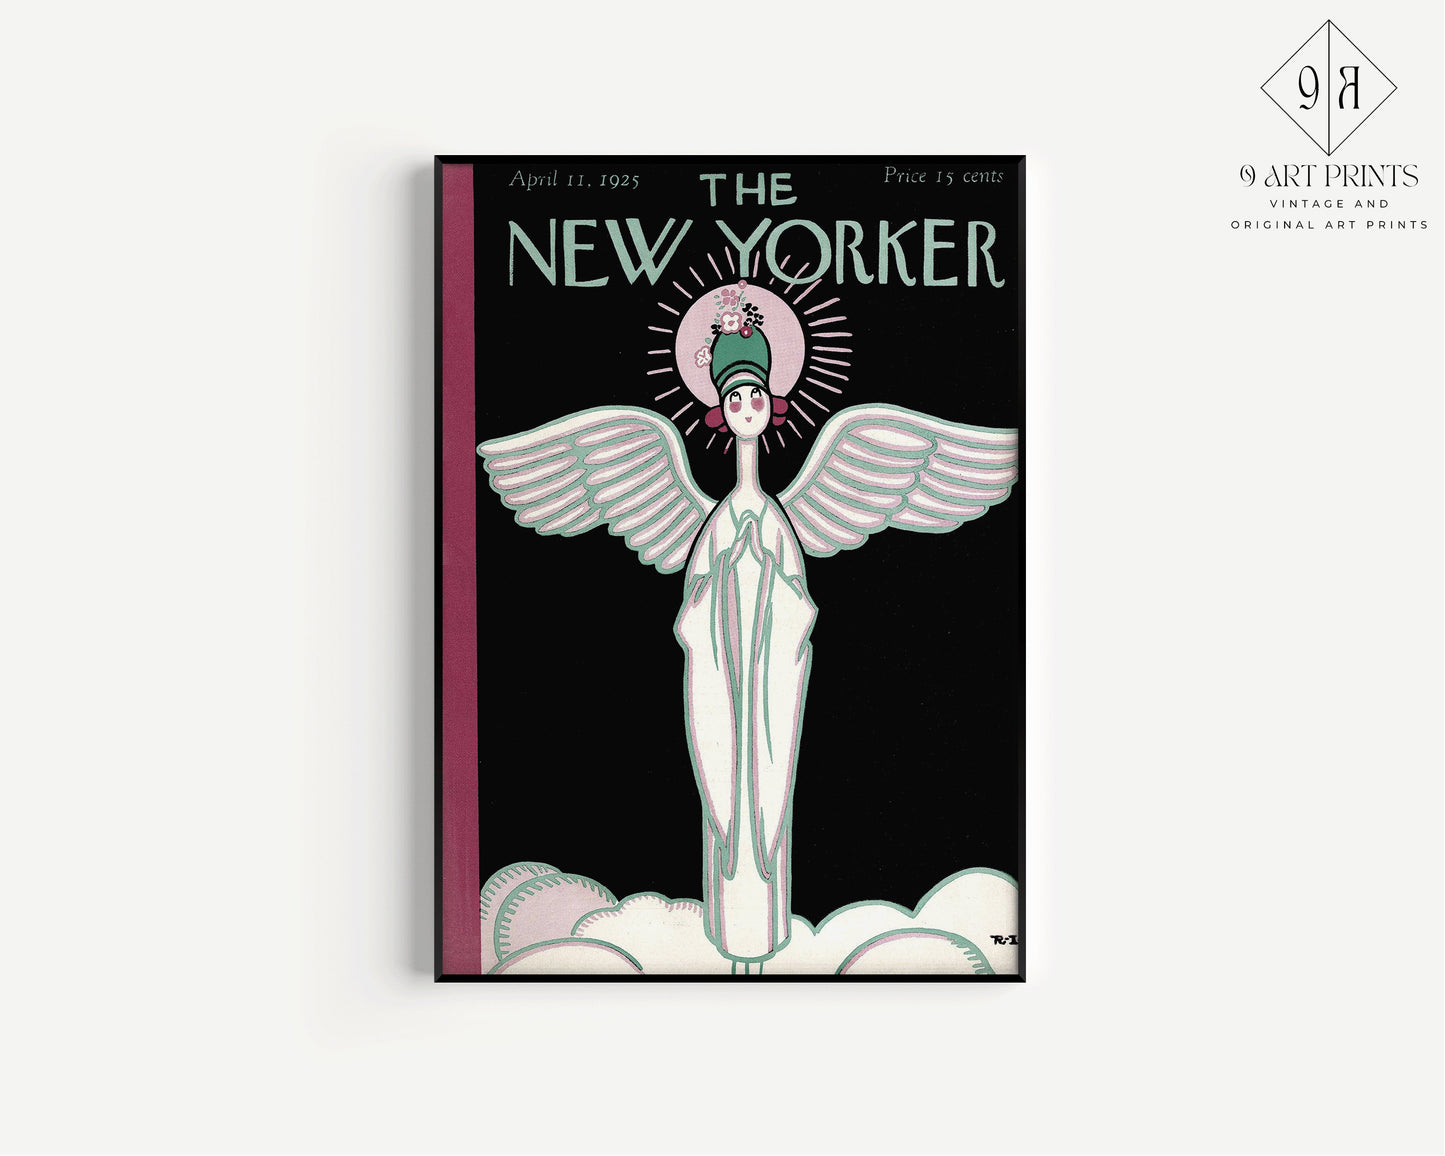 Set of 2 New Yorker Magazine Cover Print Black Green Red Retro Vintage Style Aesthetic Art Print Home Office Decor Ready to hang Framed Gift